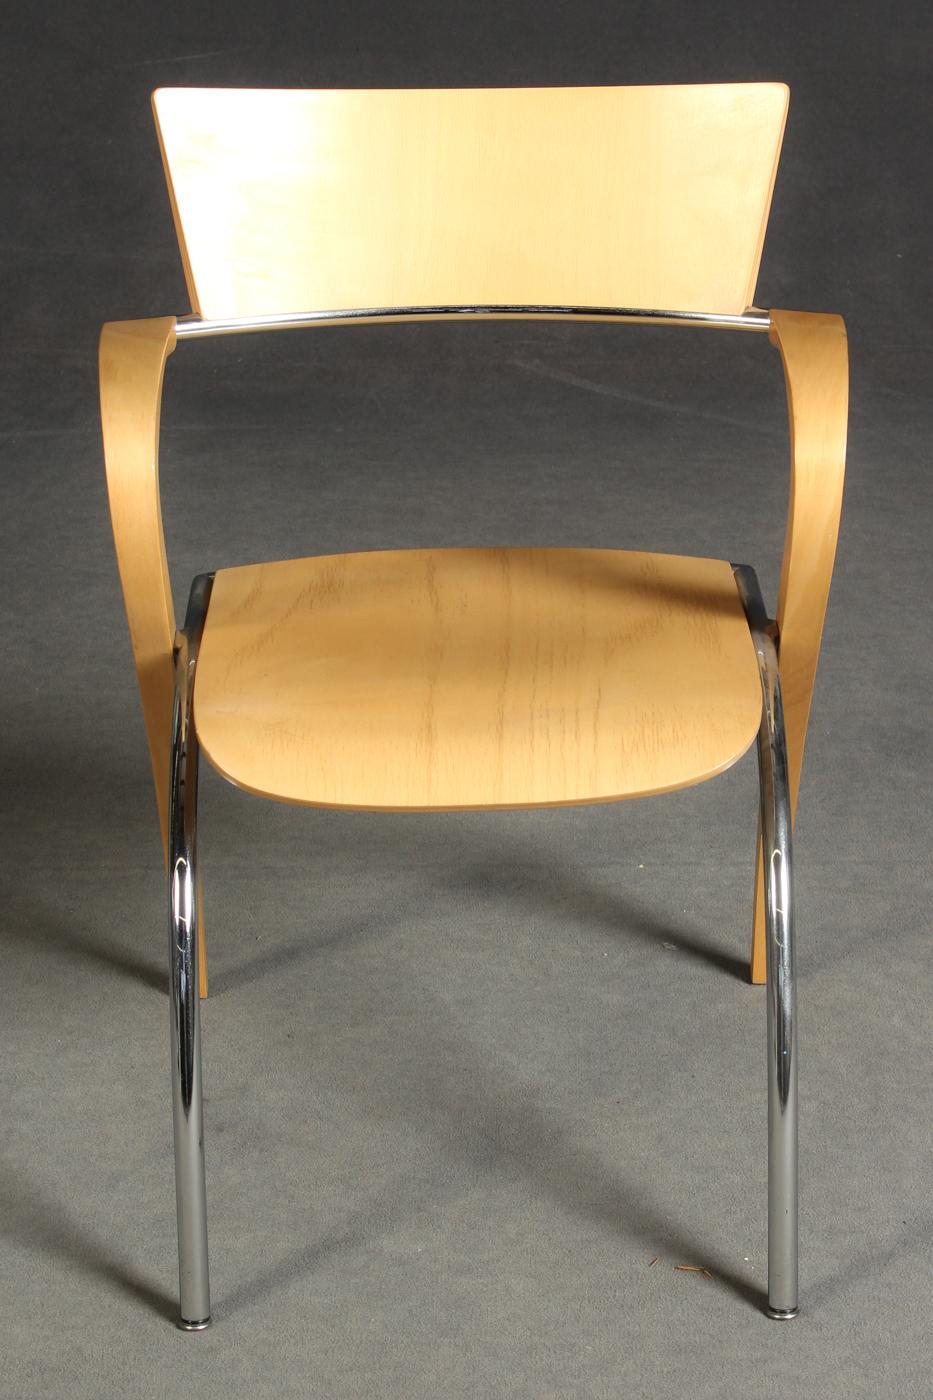 Francesco Zaccone, pair of 'golf' chairs for Brunner. Frame: steel pipe/aluminum die-cast combination. Armrest beech wood, seat and back: beech. One with seat and back polished. Plastic glides. Stackable.